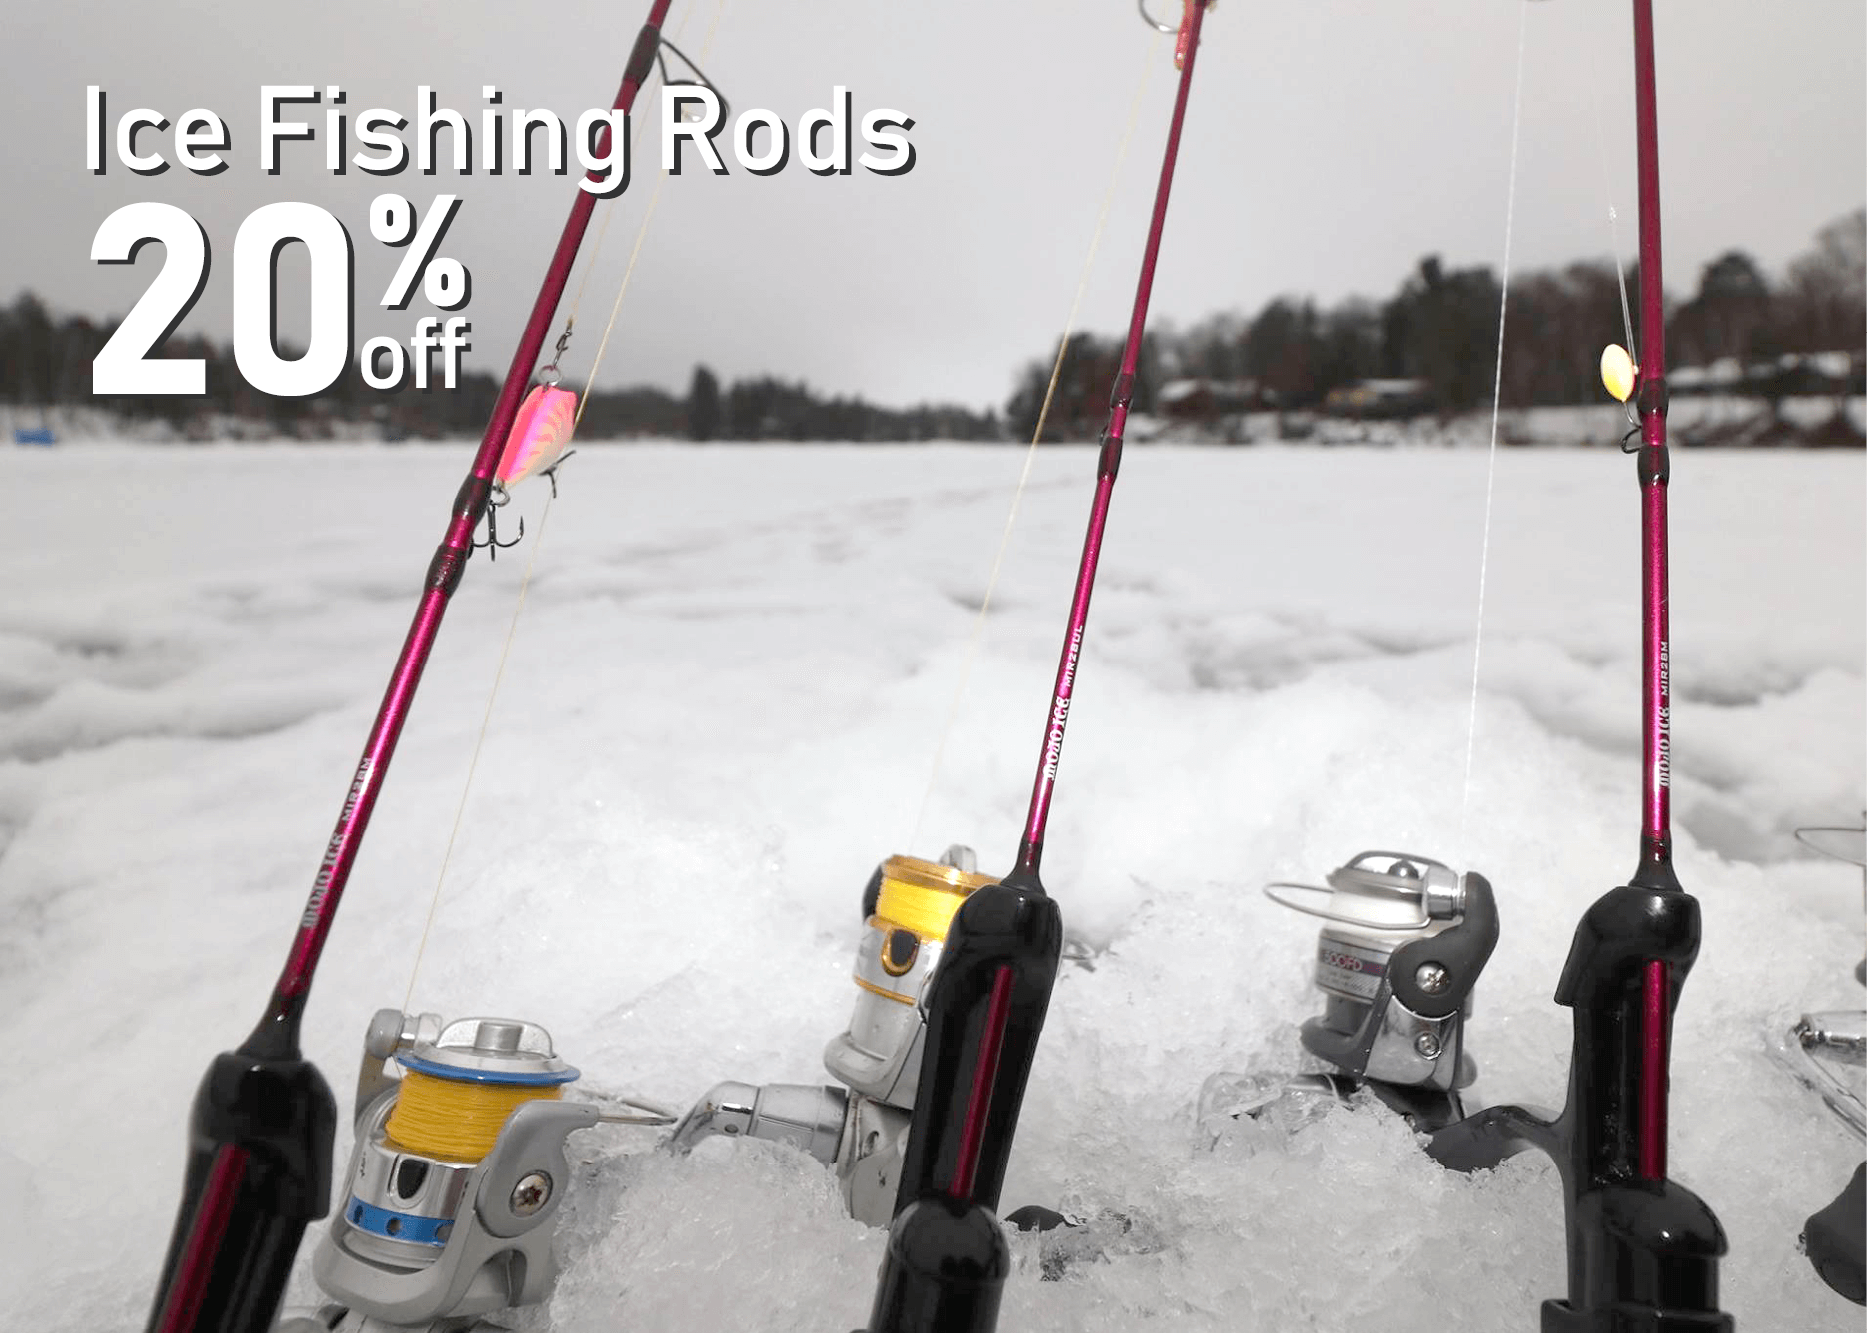 Save 20% on Ice Fishing Rods!